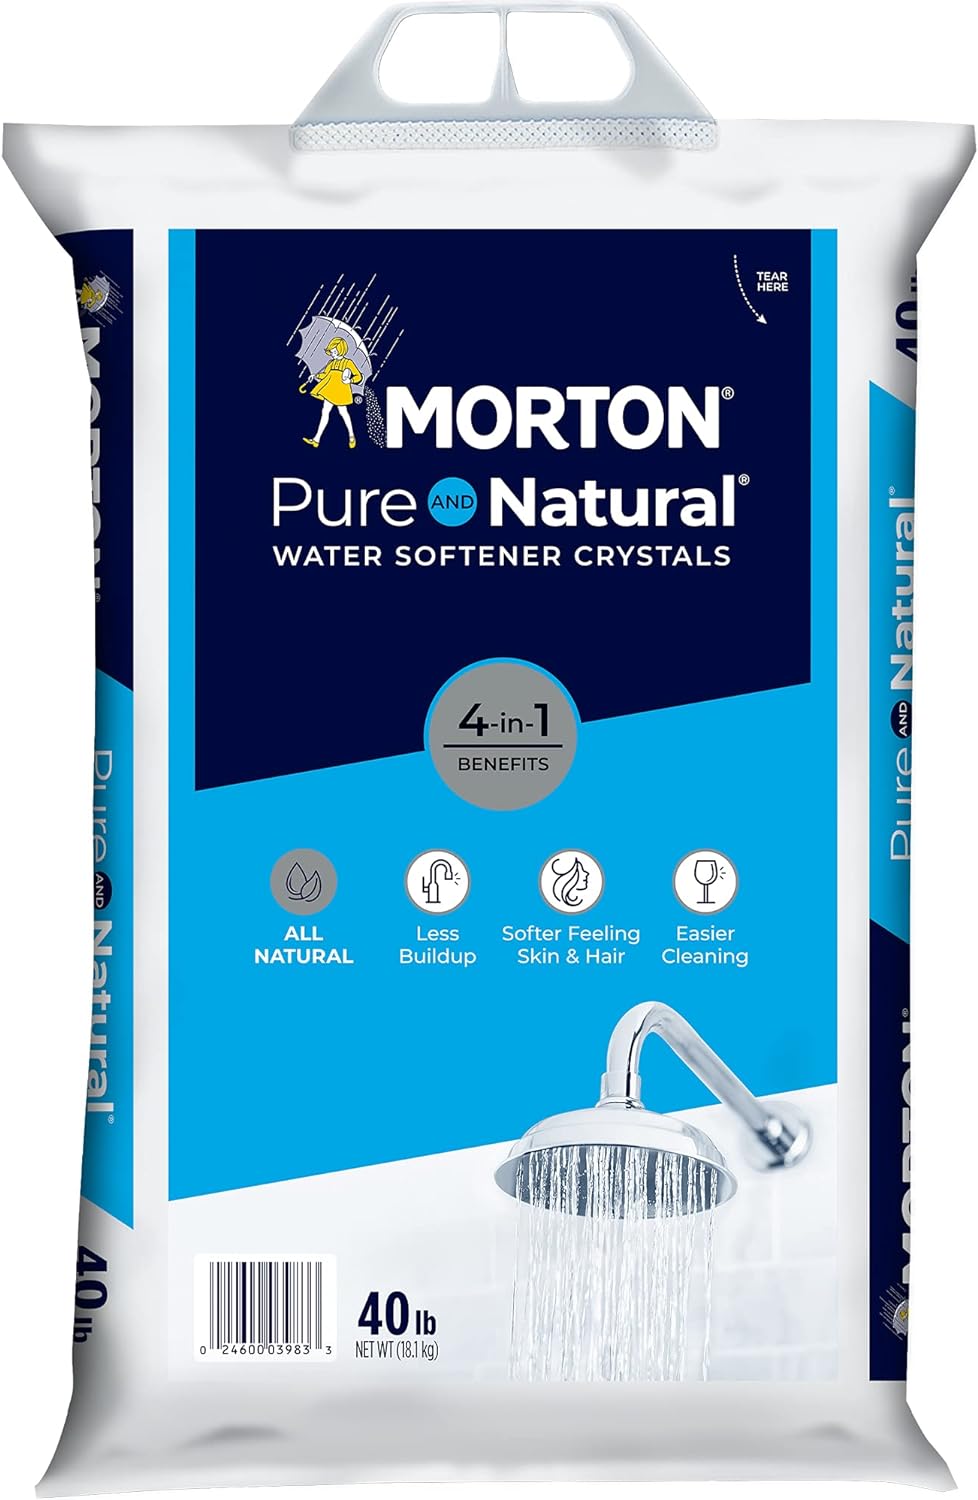 Morton U26624S Pure AND Natural Water Softening Crystals, 40-Pound,White